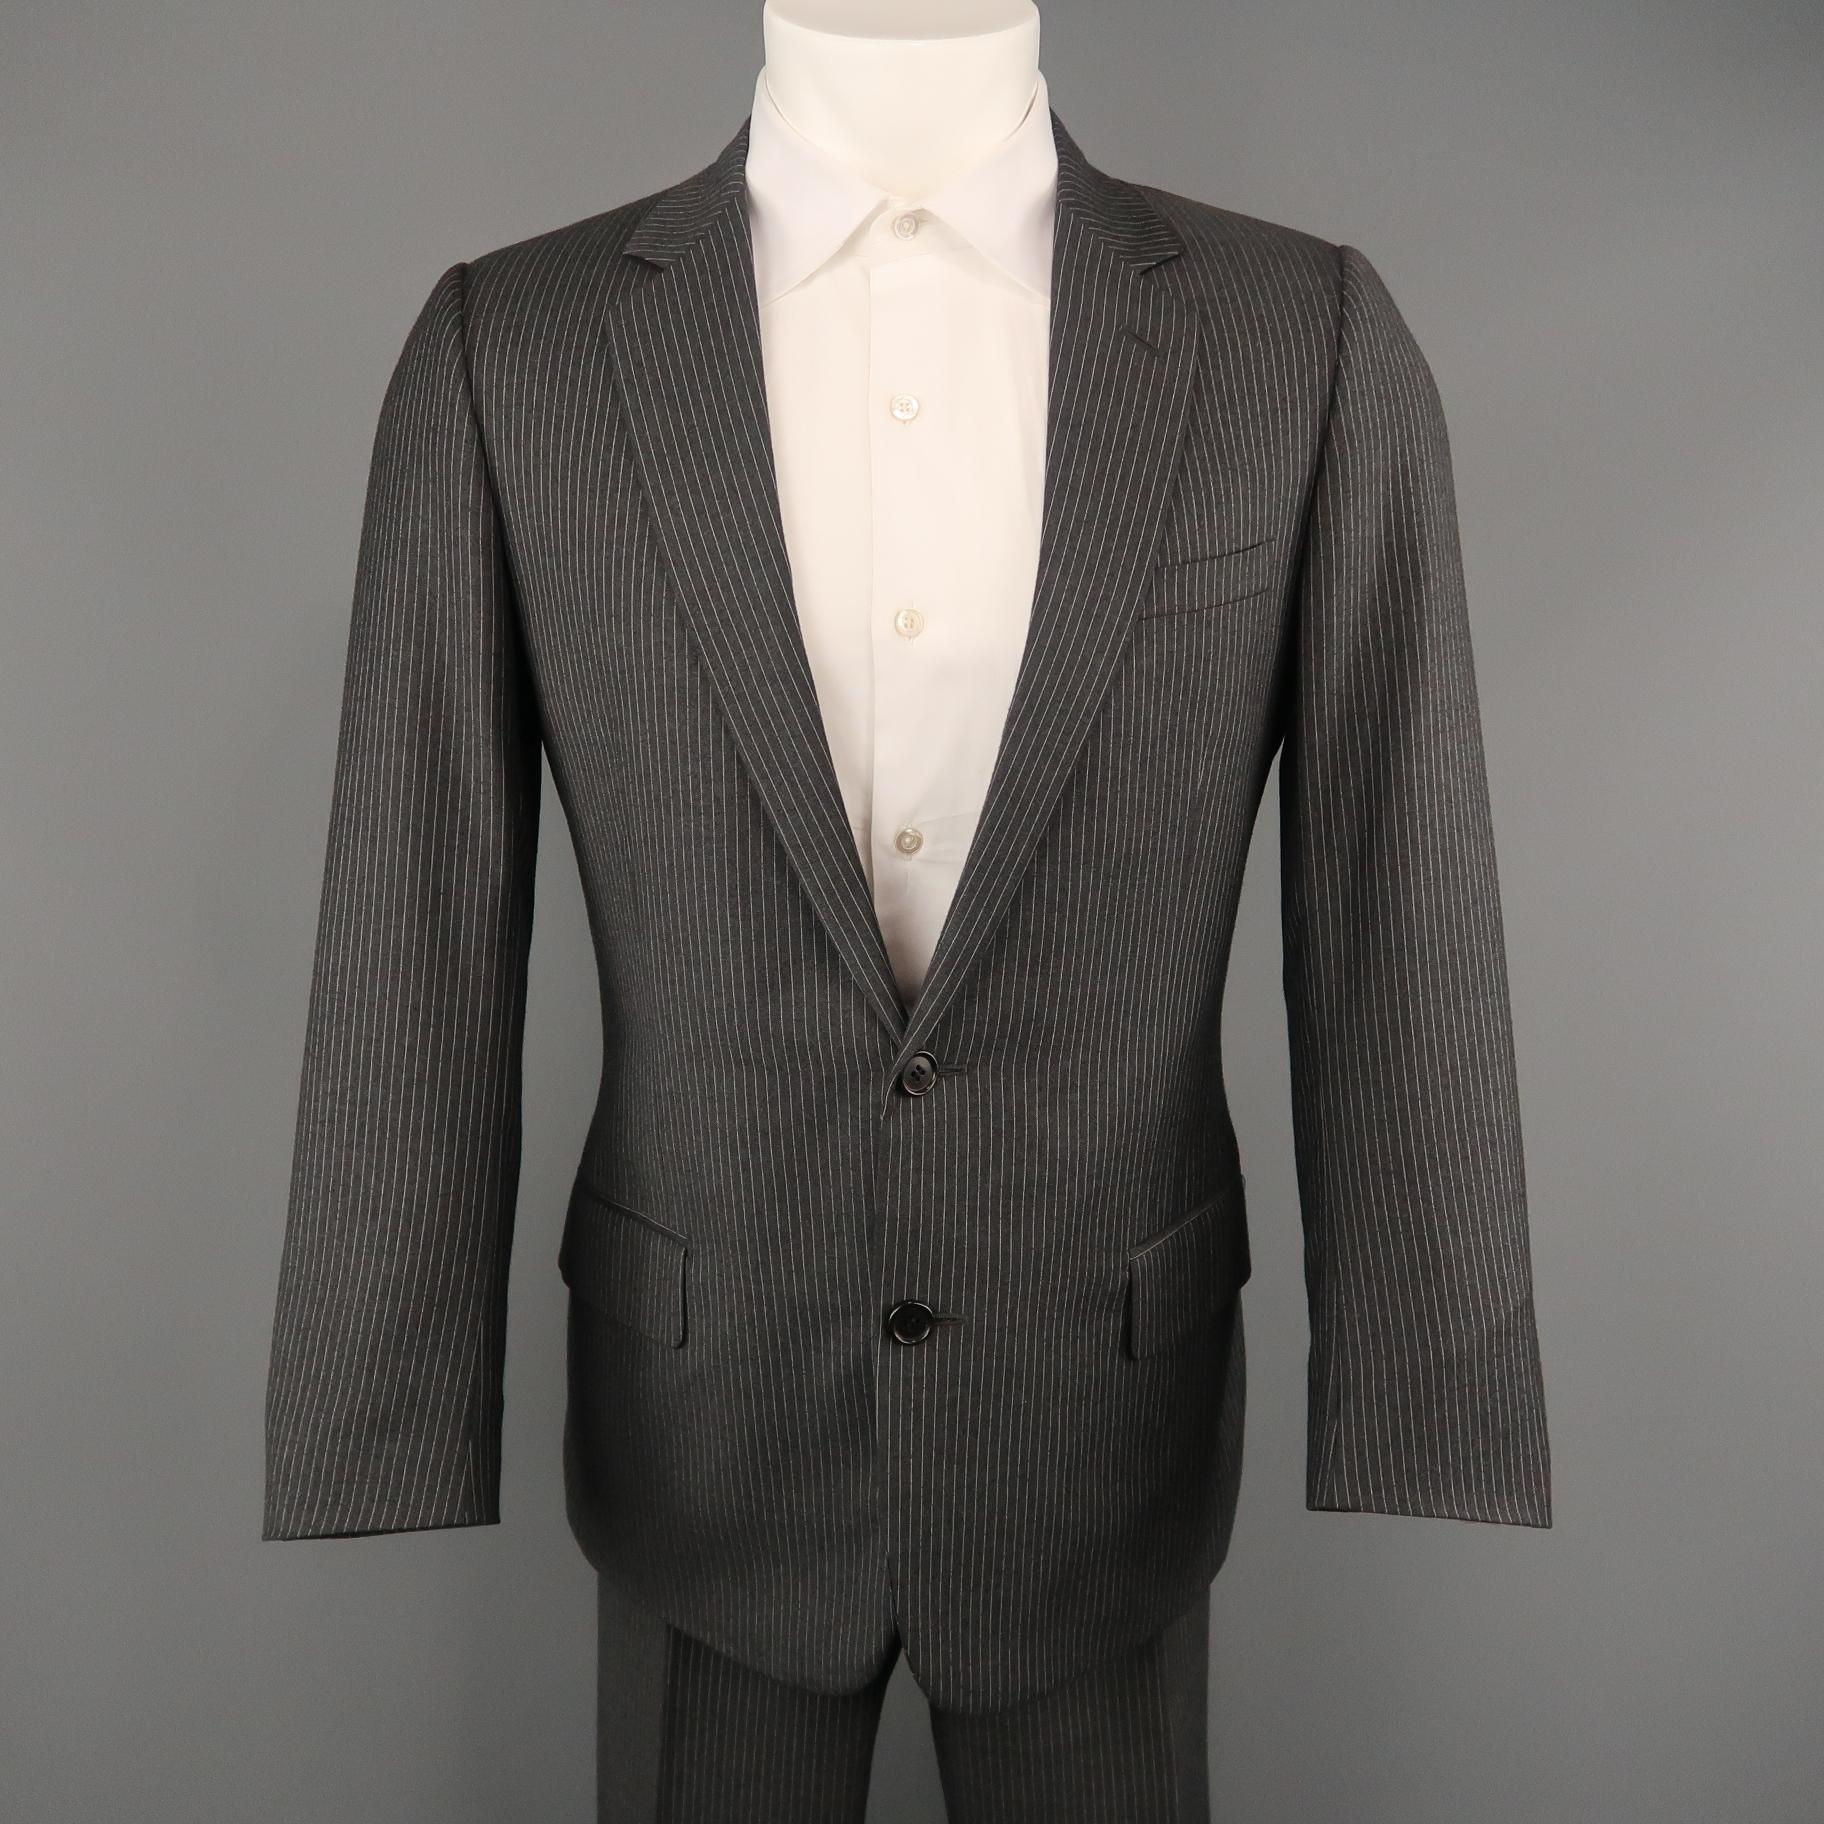 DIOR HOMME suit comes in gray pinstriped wool and includes a single breasted,  two button sport coat with notch lapel and matching flat  front trousers. Made in Italy.
 
Excellent Pre-Owned Condition.
Marked: IT 48 R
 
Measurements:
